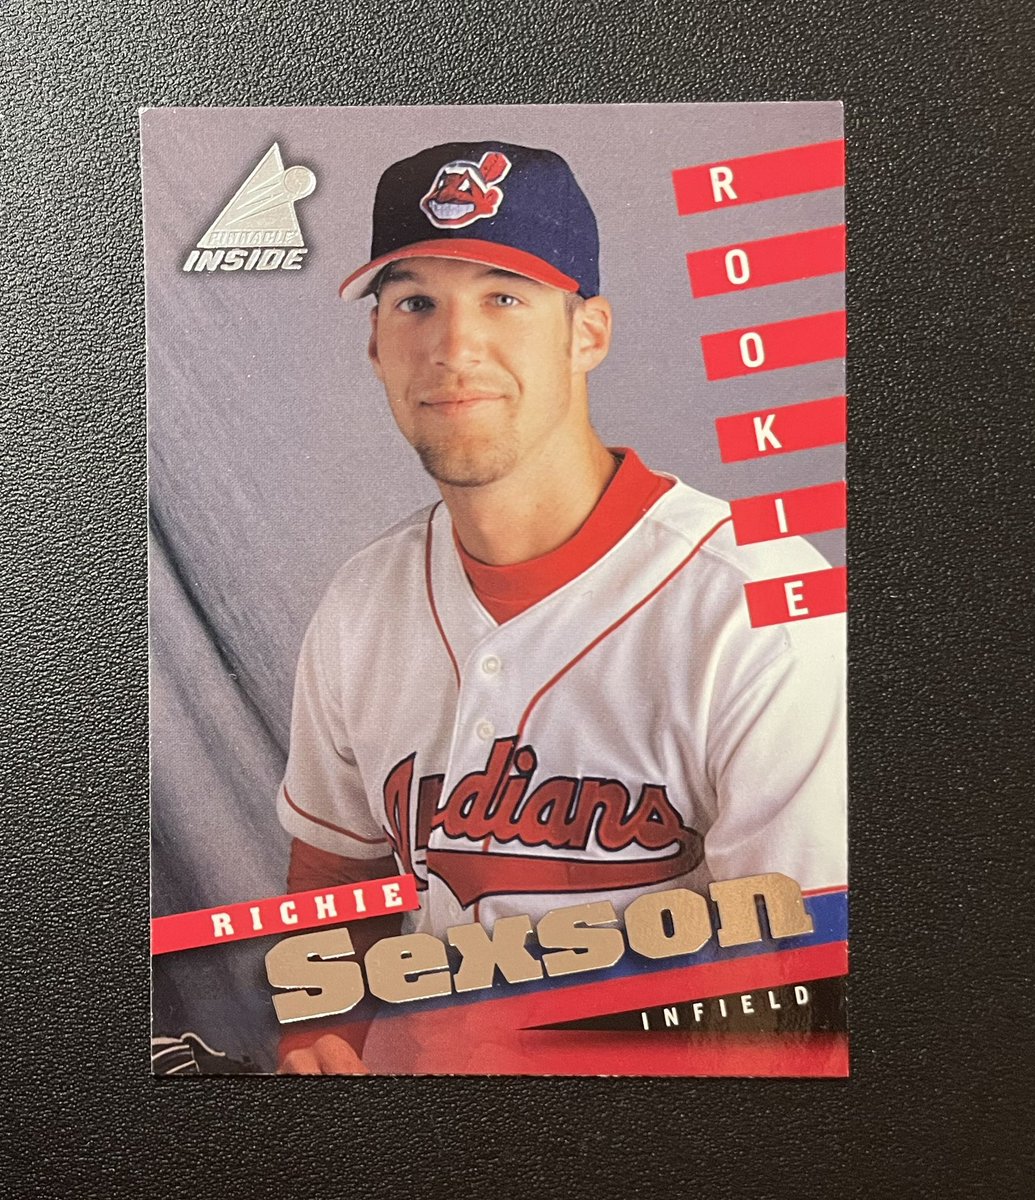 Hey @CleGuardians fans… who remembers the jacks this guy used to hit?! #guardscards #cleveland #guardians #sportscards https://t.co/u1kfCJyfNf